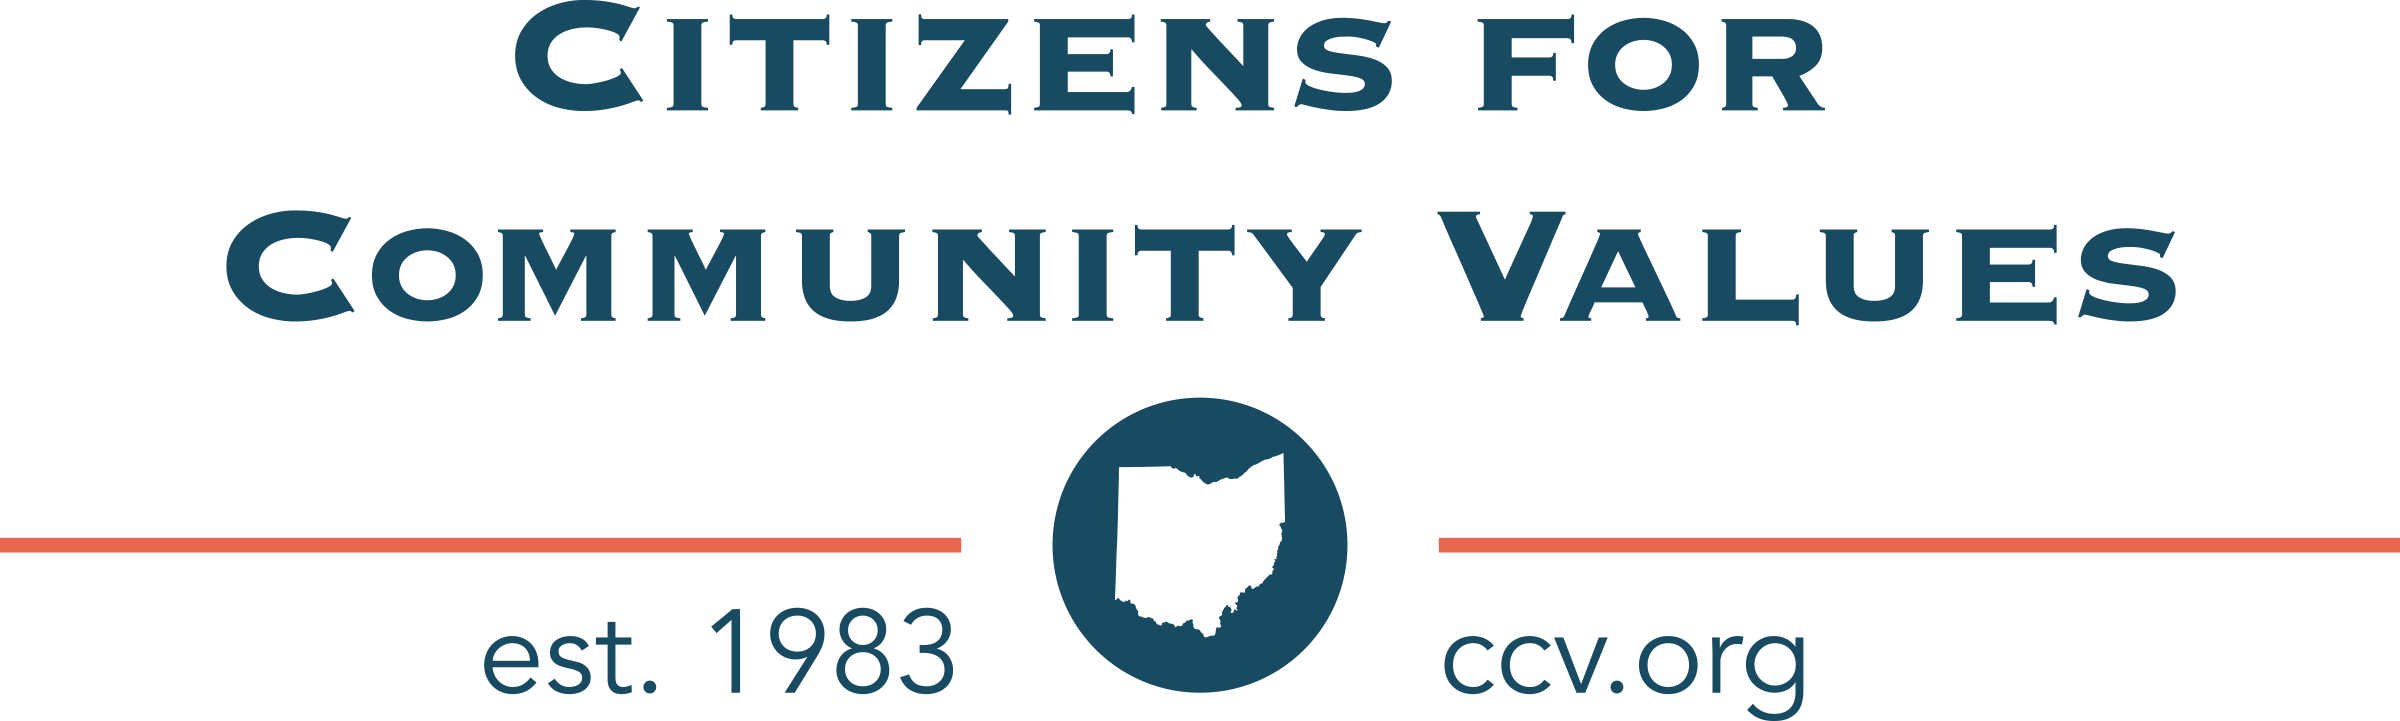 Core Issues For A Thriving Ohio - Citizens For Community Values (2400x721)